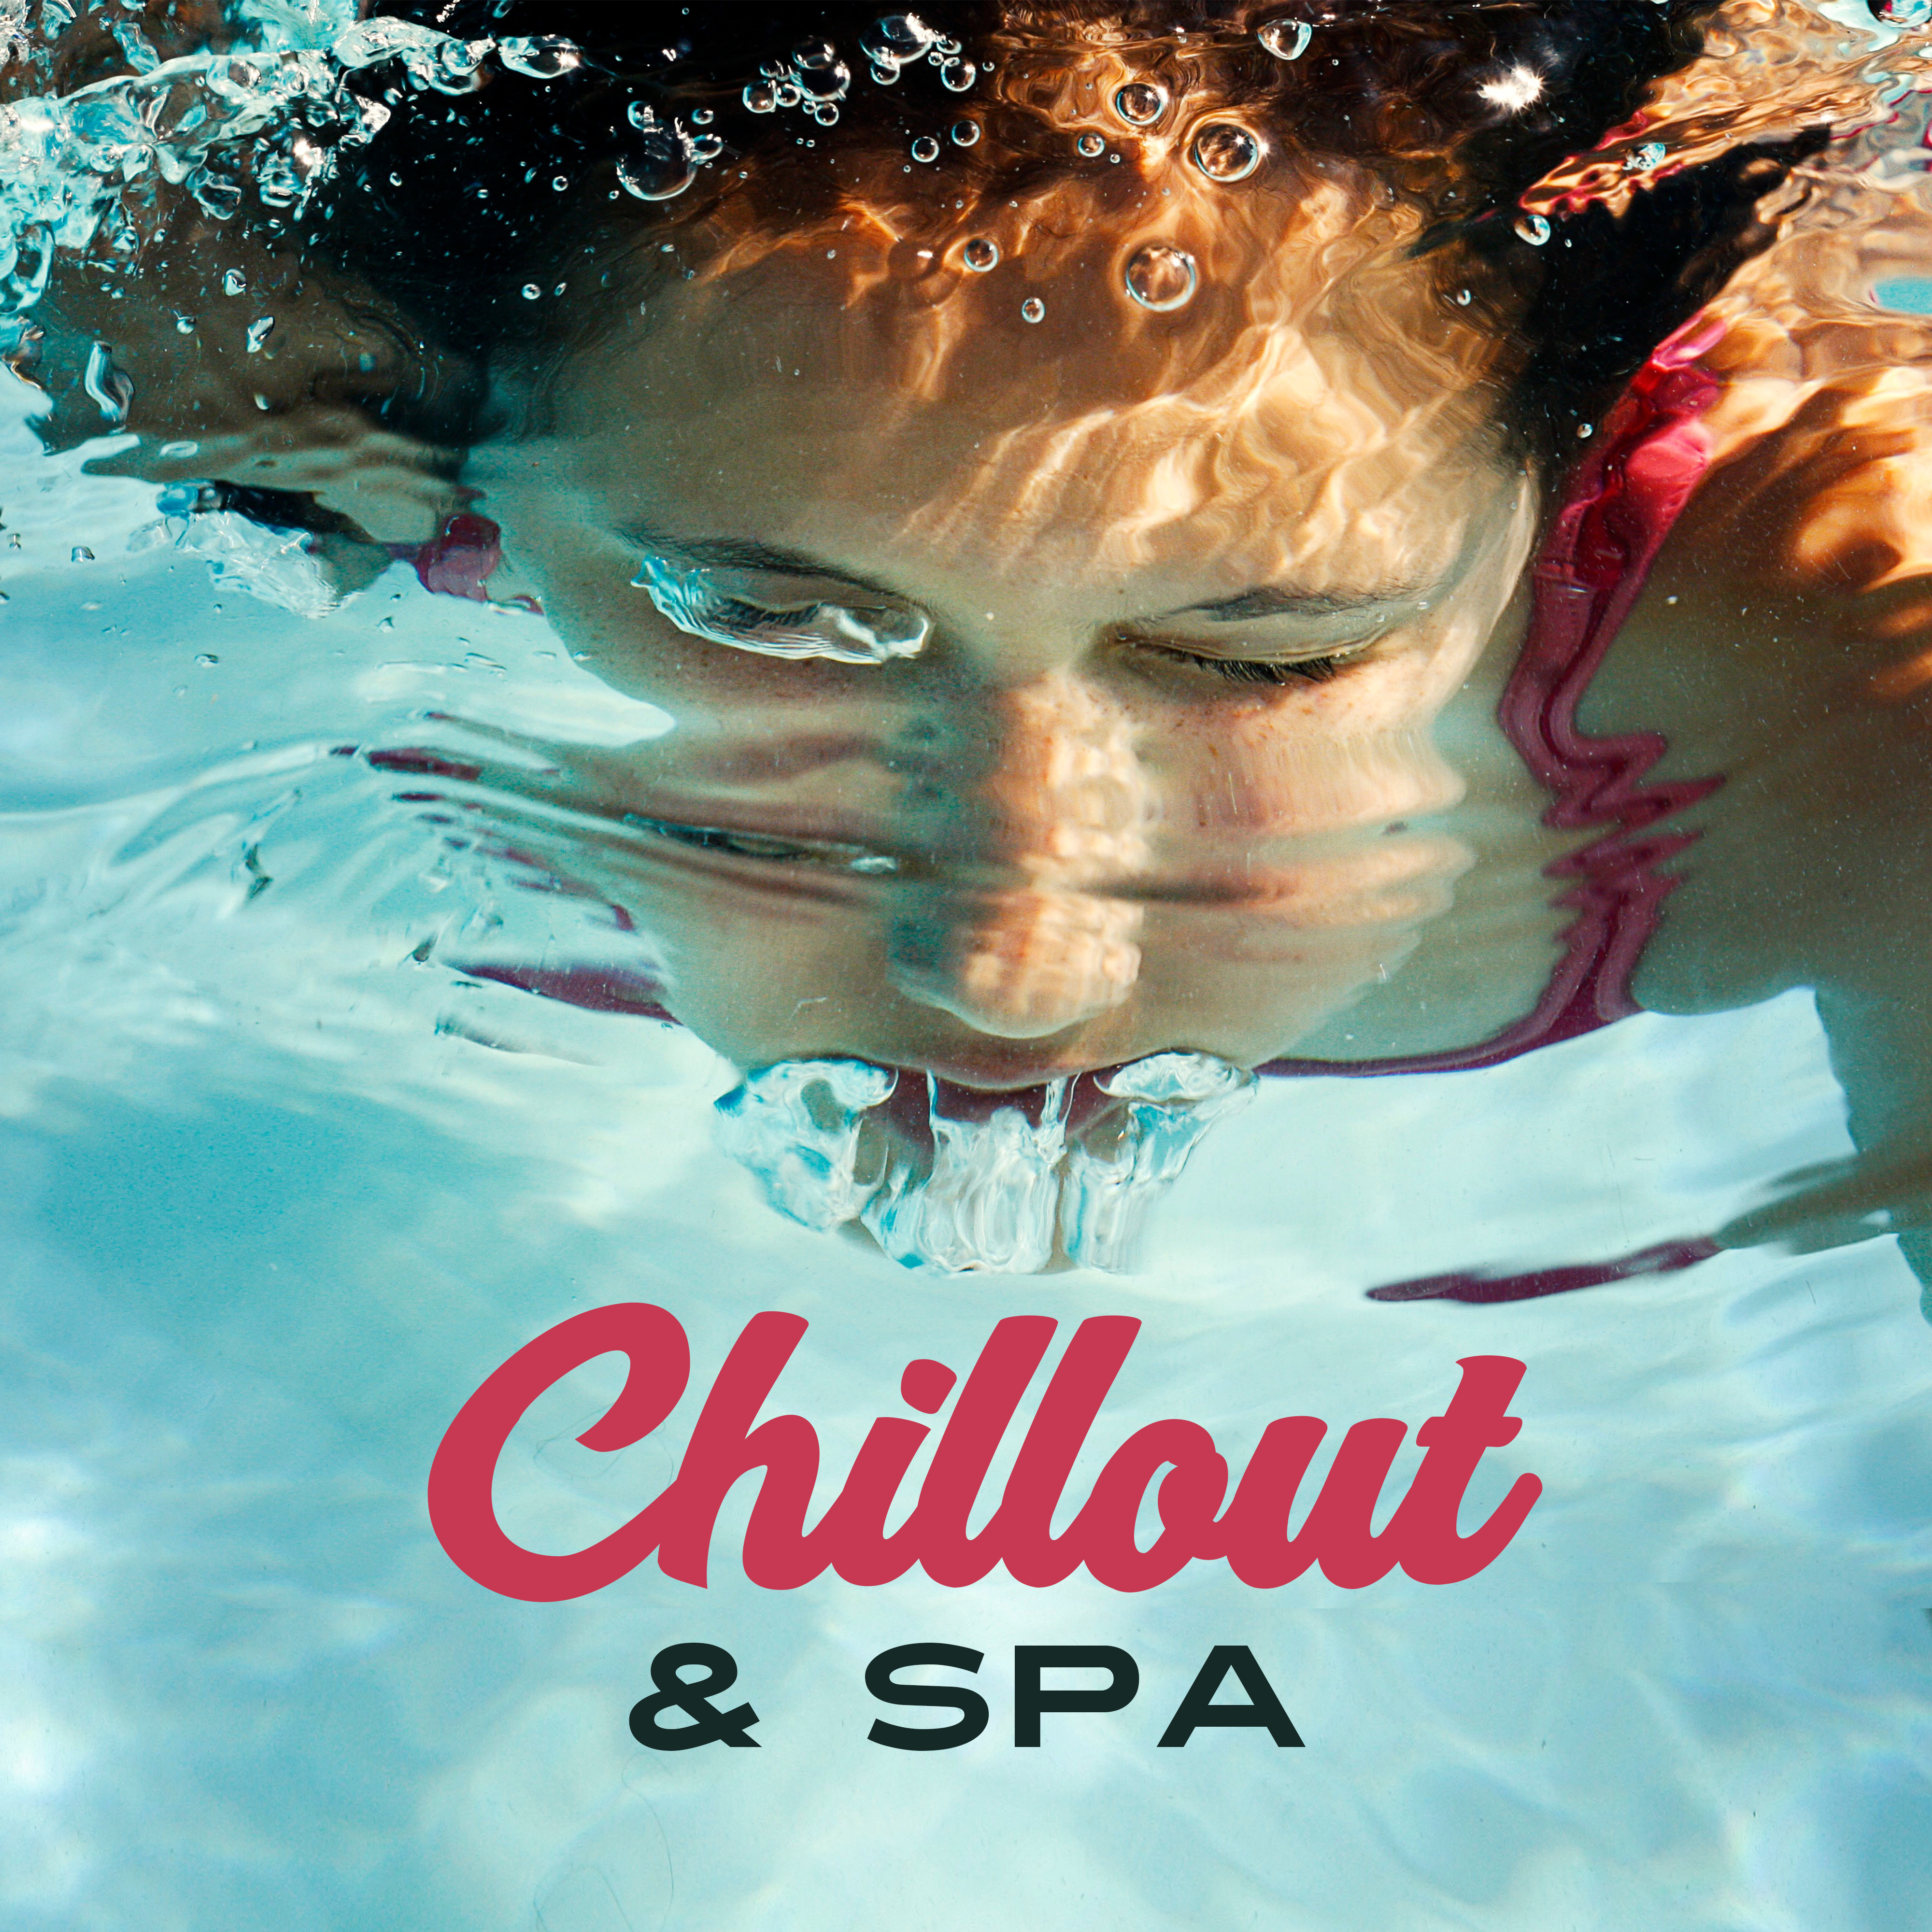 Chillout & Spa – Soft Chill Out Music, Summer Spa 2017, Relaxed Body & Mind, Chillout 2 You